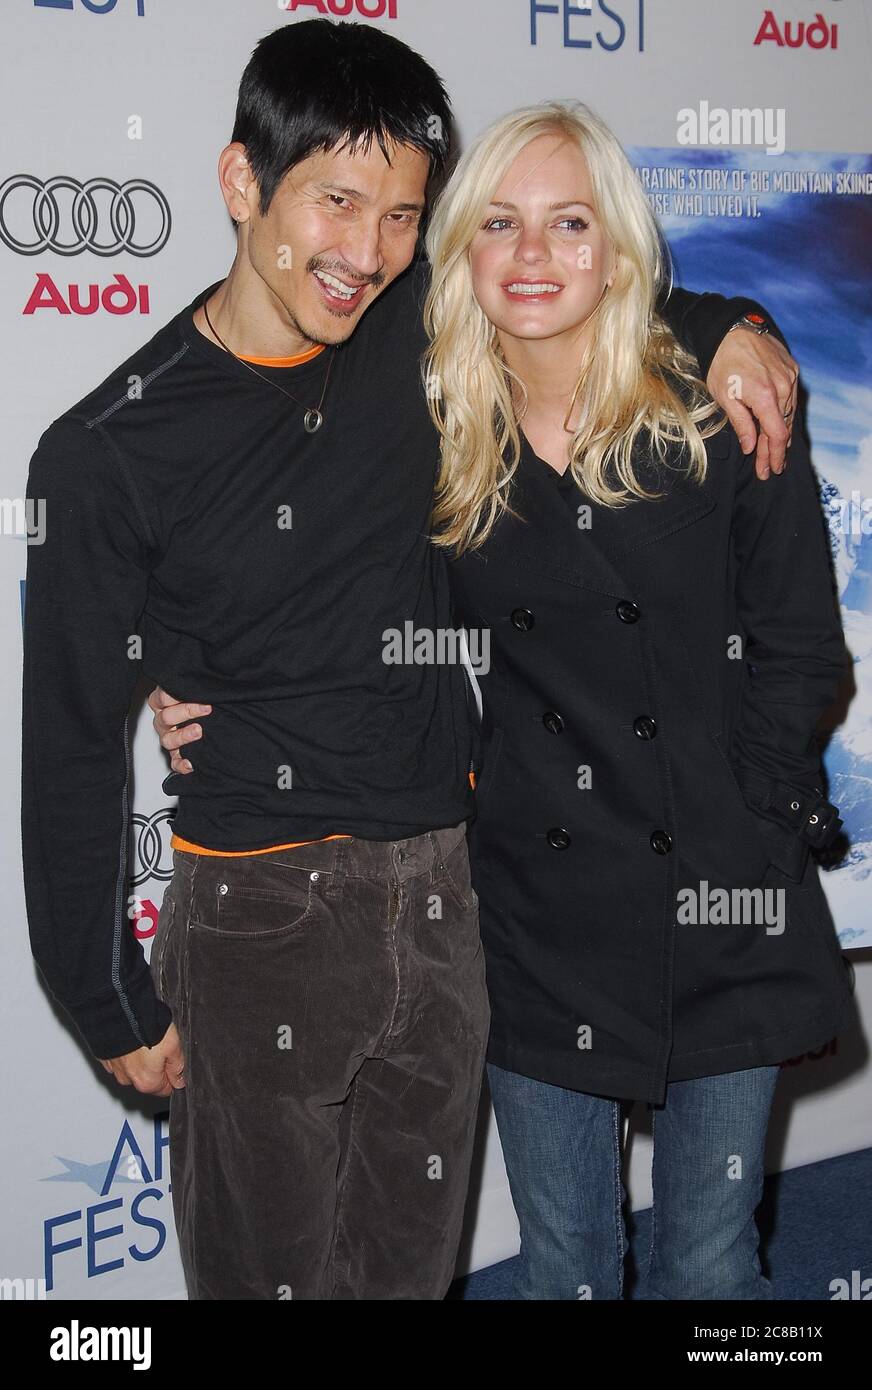 Filmmaker Greg Araki and Actress Anna Faris at the AFI FEST 2007 Presents a Screening of 'Smiley Face' held at the AFI Fest Rooftop Village of the Arclight Cinemas in Hollywood, CA. The event took place on Saturday, November 10, 2007. Photo by: SBM / PictureLux - File Reference # 34006-9919SBMPLX Stock Photo